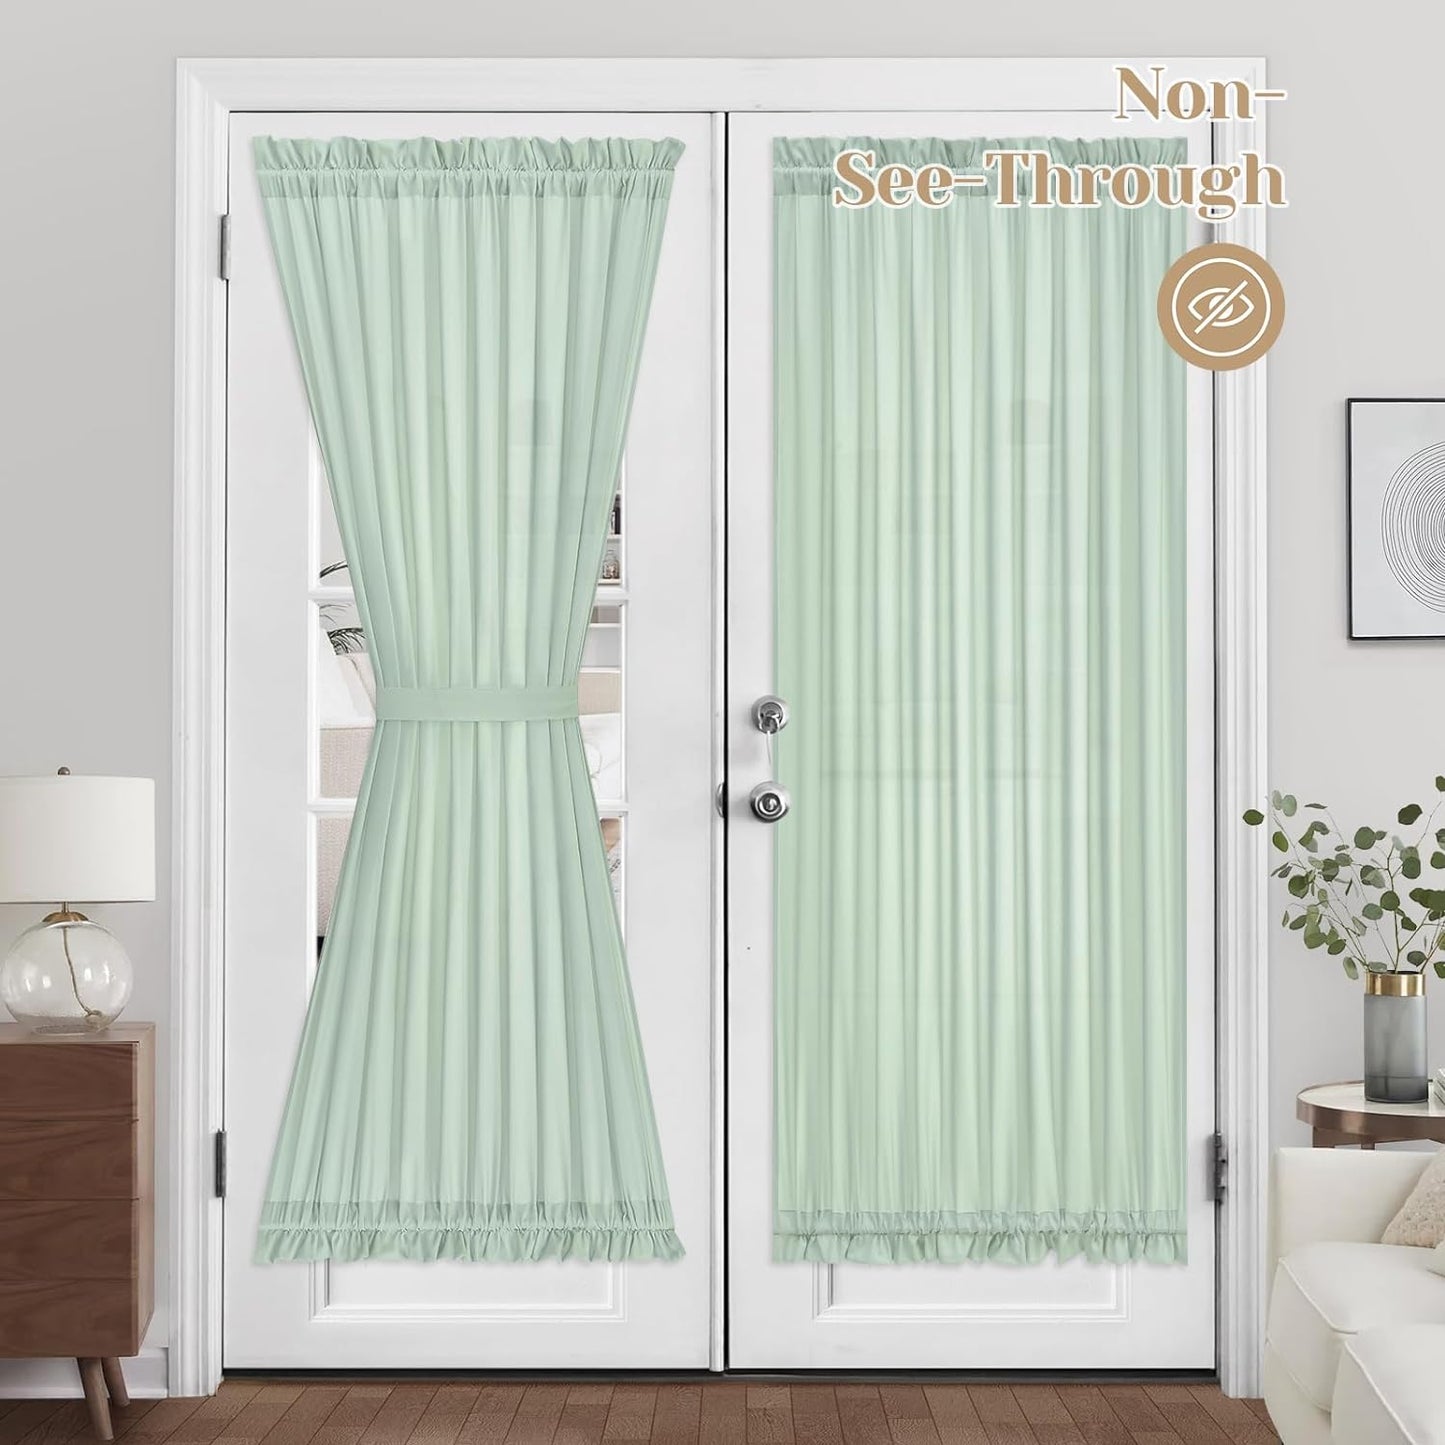 HOMEIDEAS Non-See-Through Sidelight Curtains for Front Door, Privacy Semi Sheer Door Window Curtains, Rod Pocket Light Filtering French Door Curtains with Tieback, (1 Panel, White, 26W X 72L)  HOMEIDEAS Sage Green 1 Panel-54 X 72 